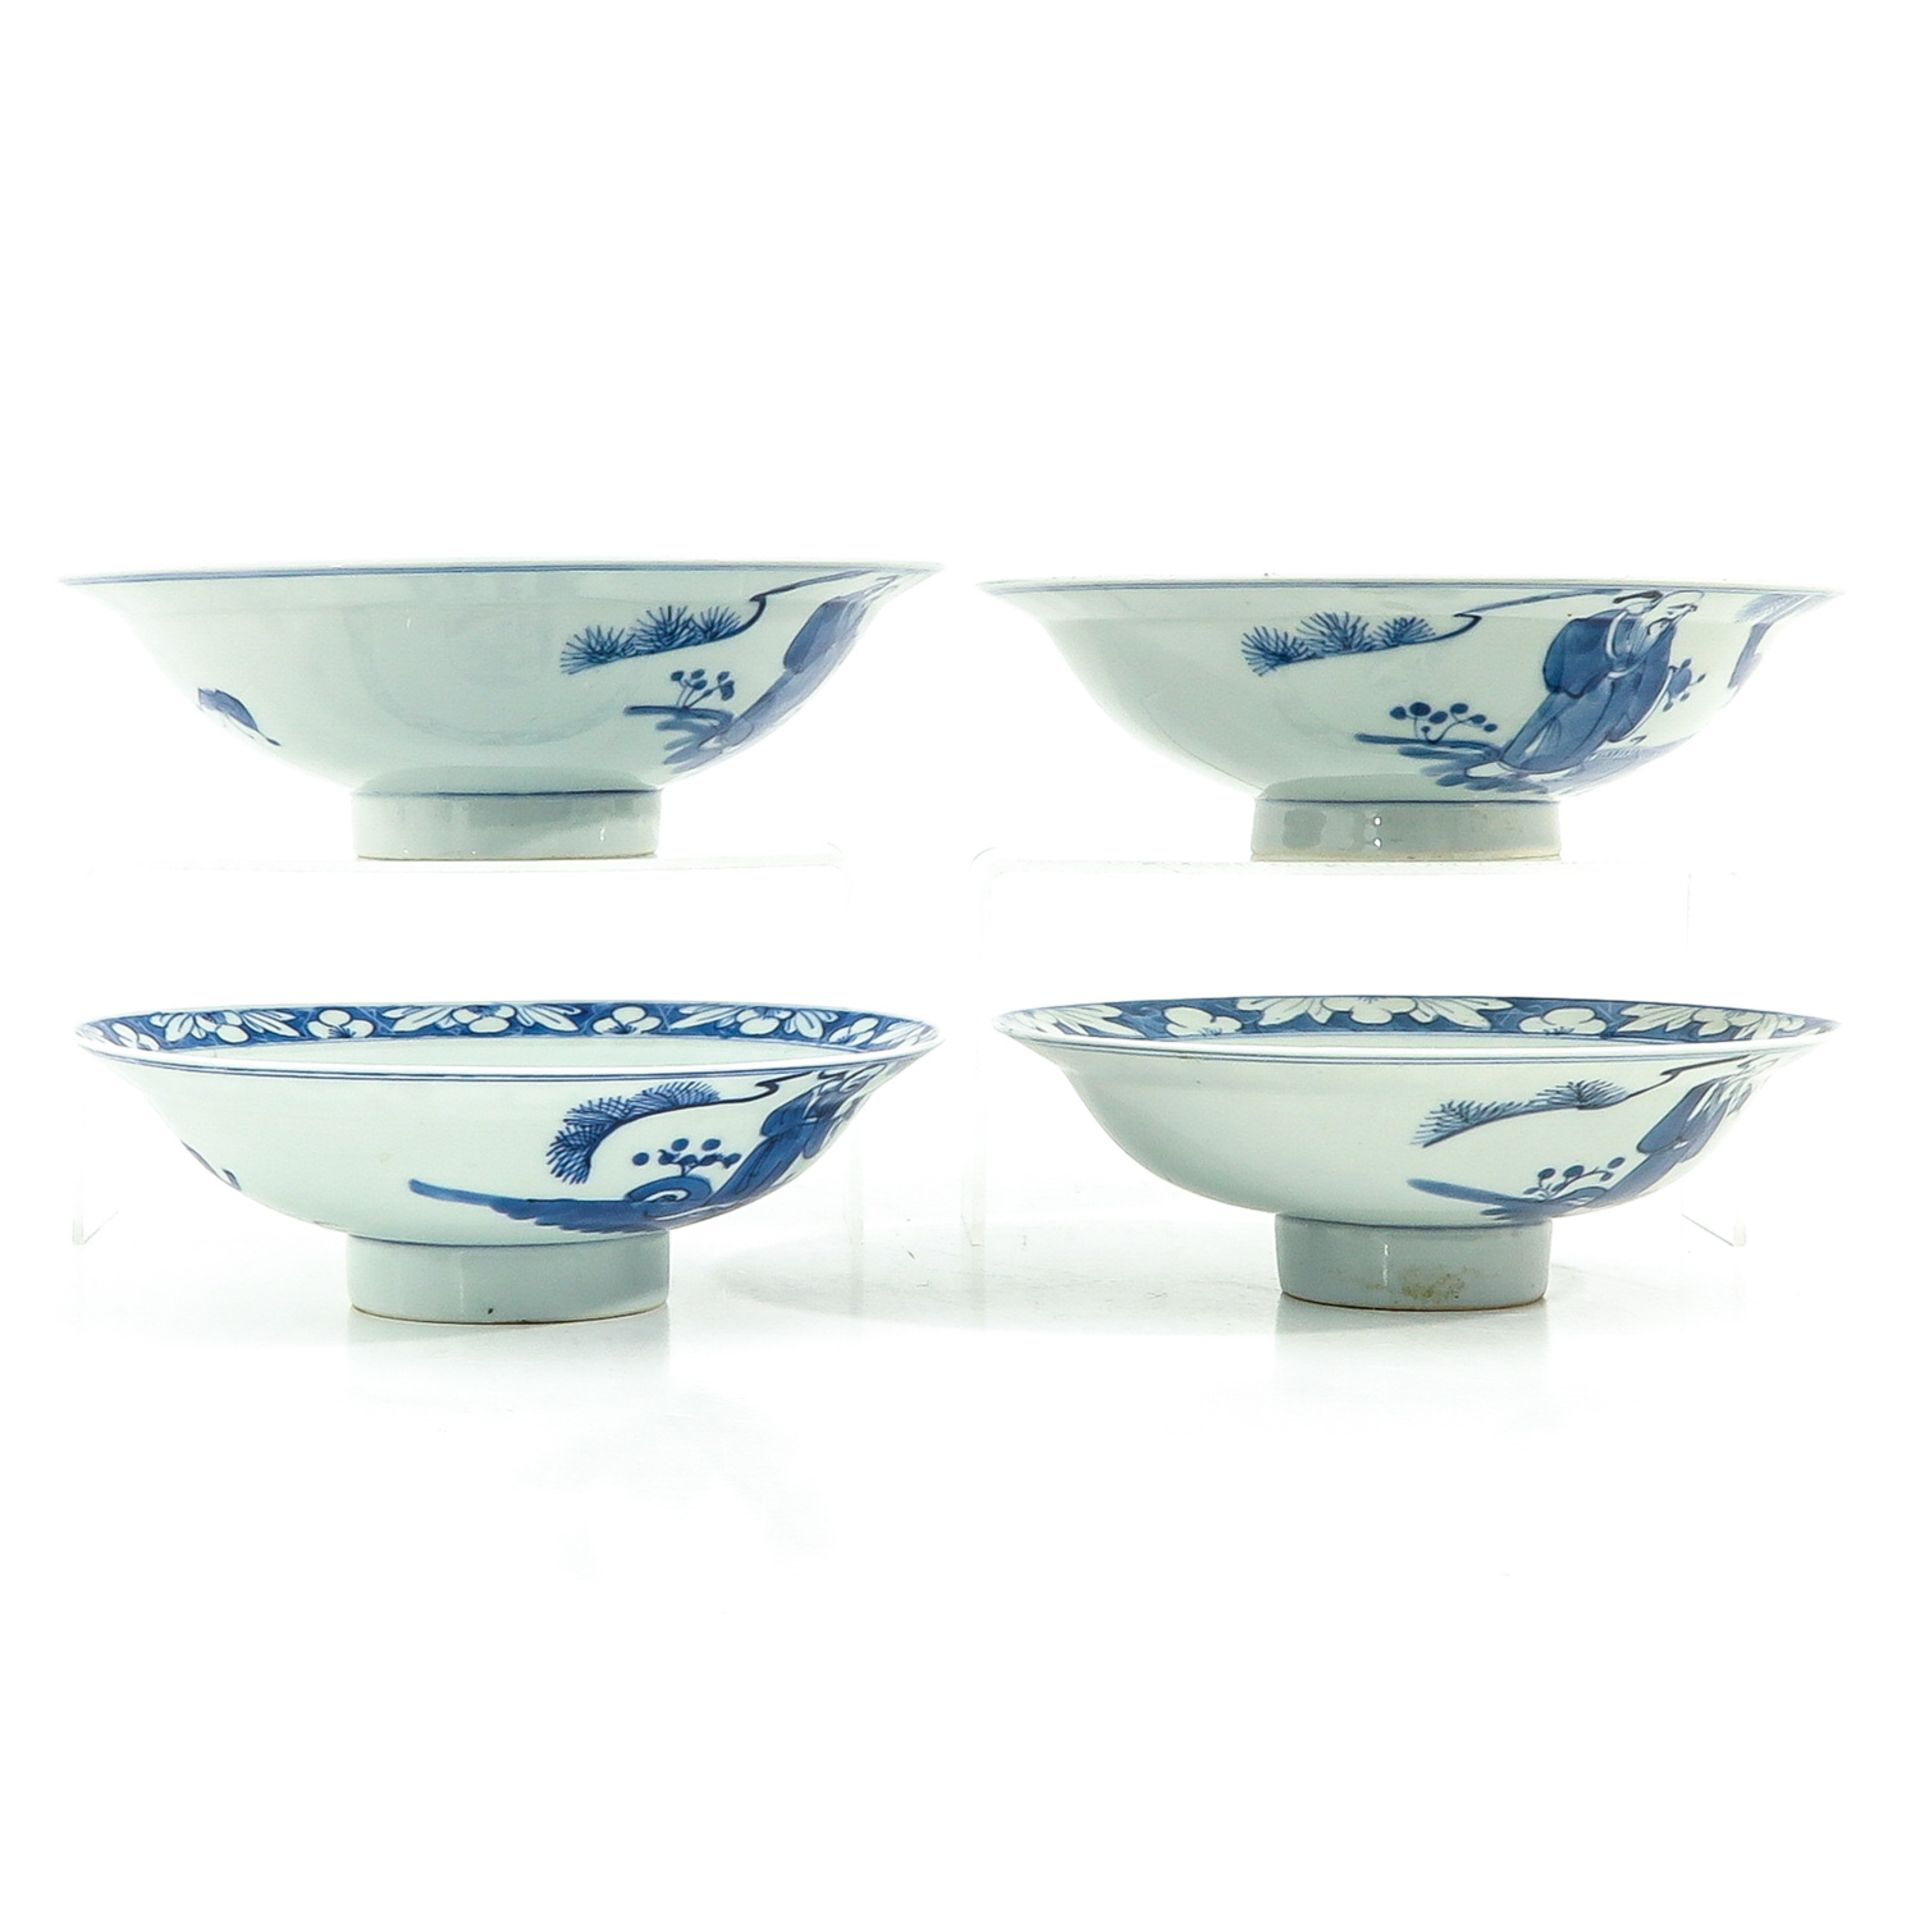 A Series of 4 Blue and White Bowls - Image 4 of 10